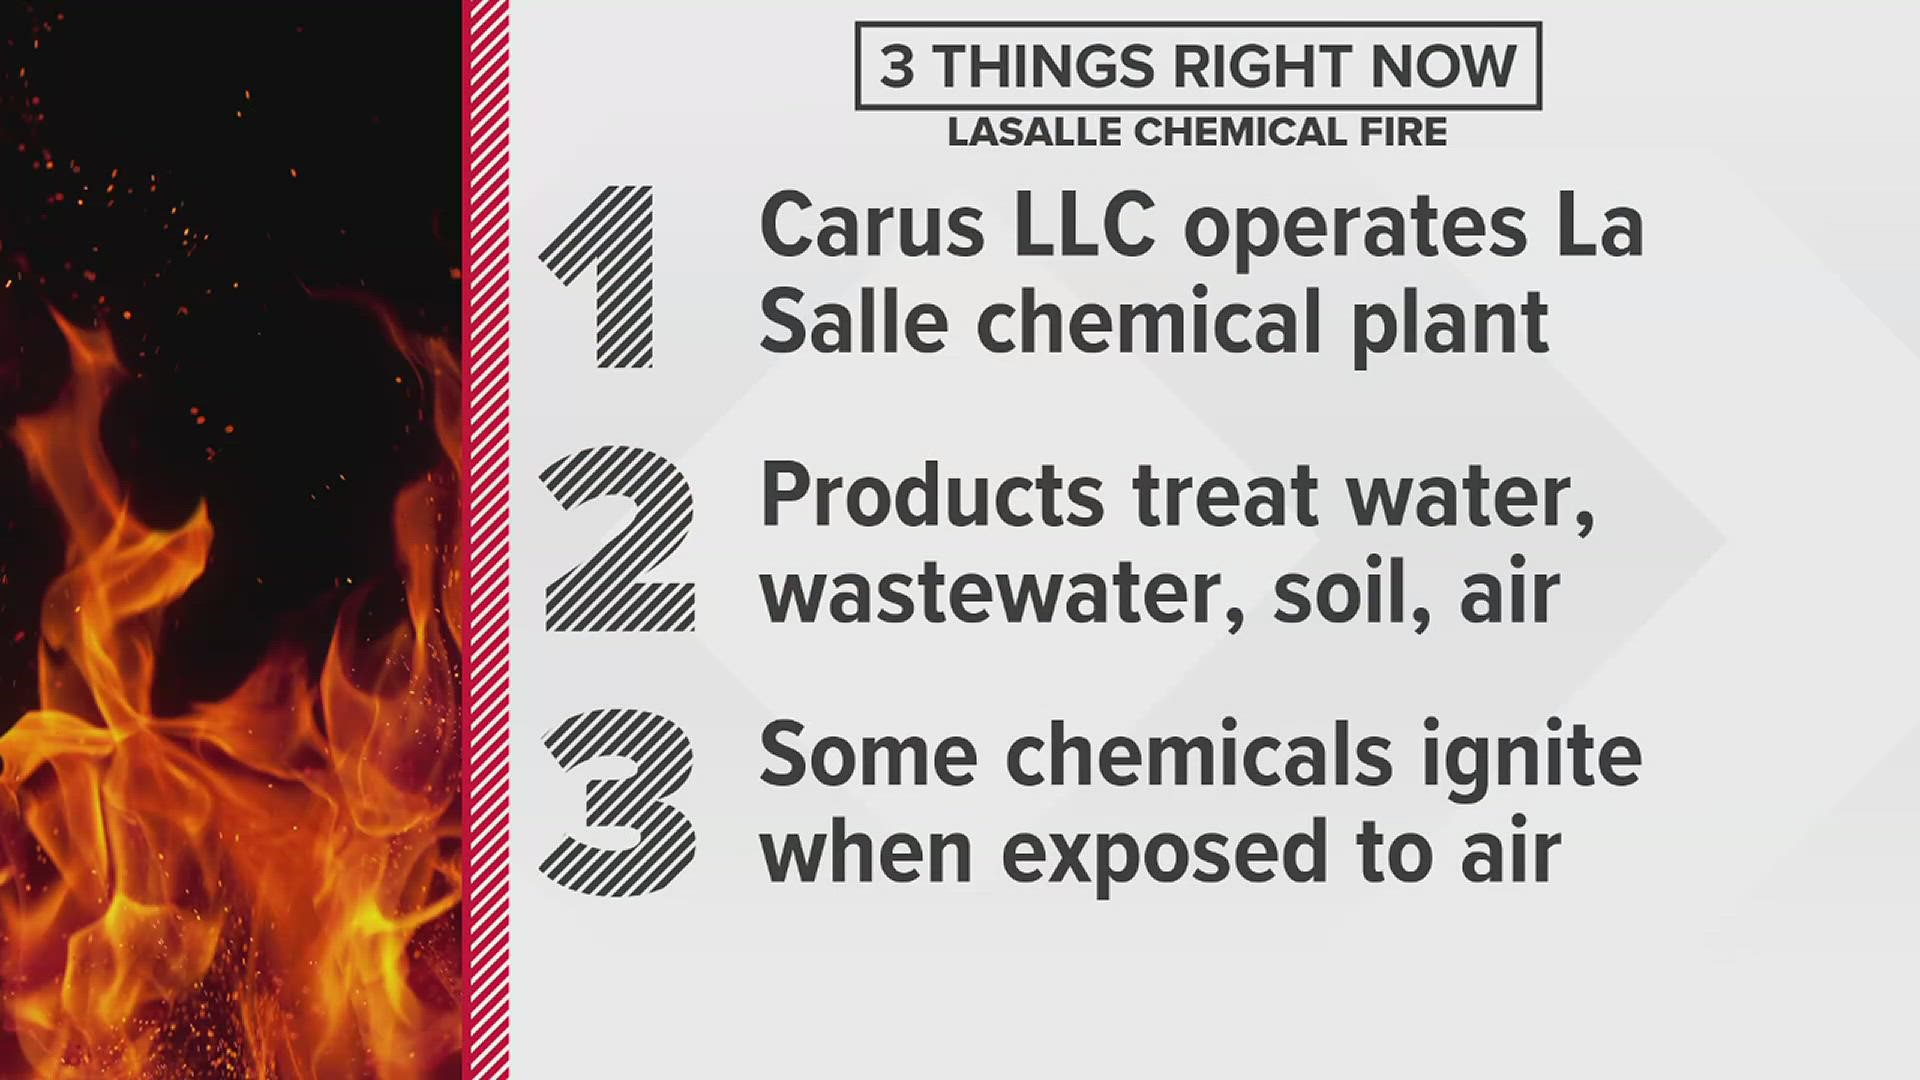 After the fire began Wednesday morning at Carus Chemical in La Salle, officials sent an emergency alert advising people who live in the city's third and fourth wards